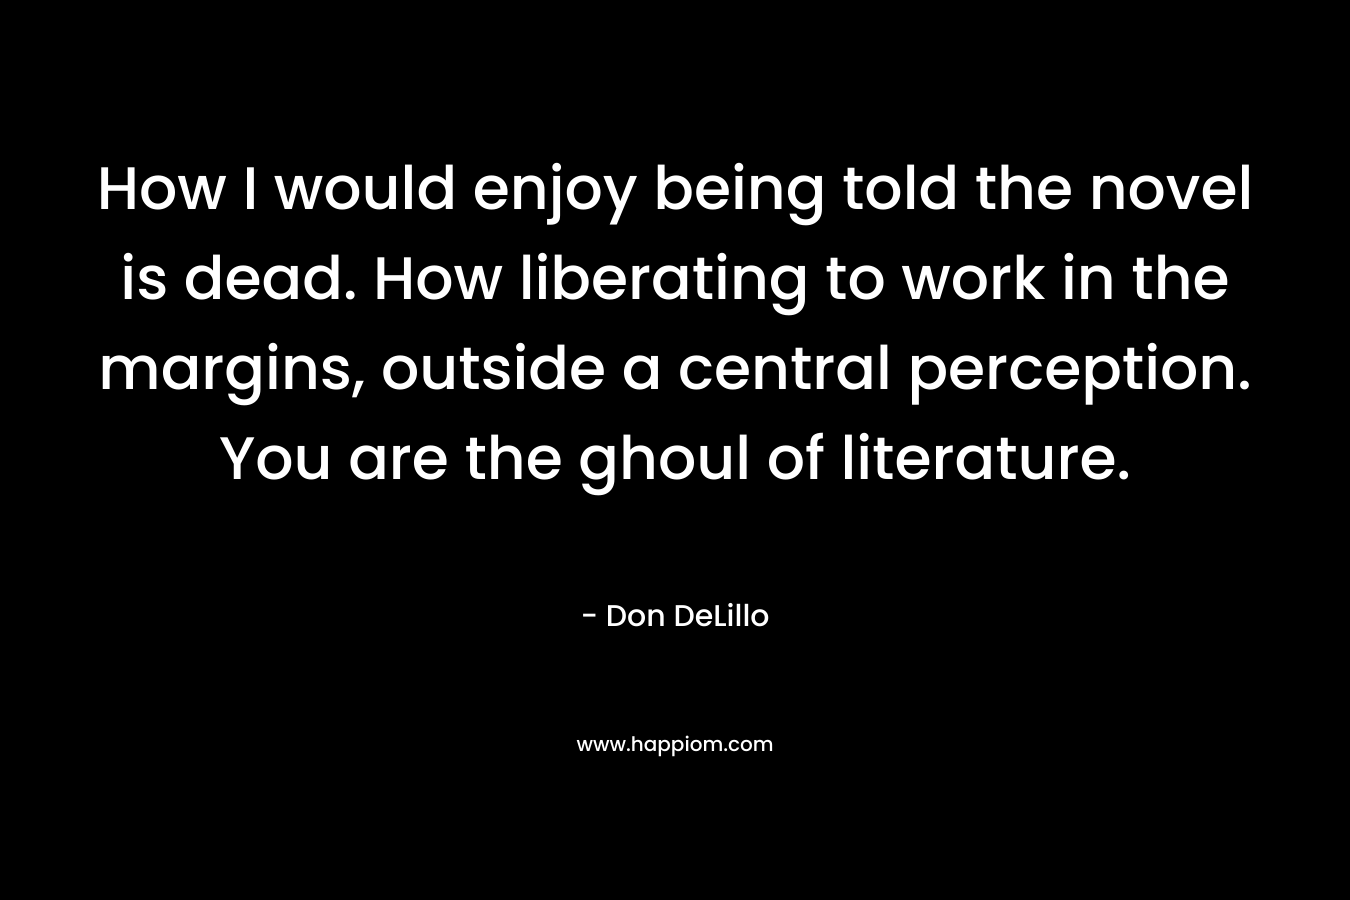 How I would enjoy being told the novel is dead. How liberating to work in the margins, outside a central perception. You are the ghoul of literature. – Don DeLillo